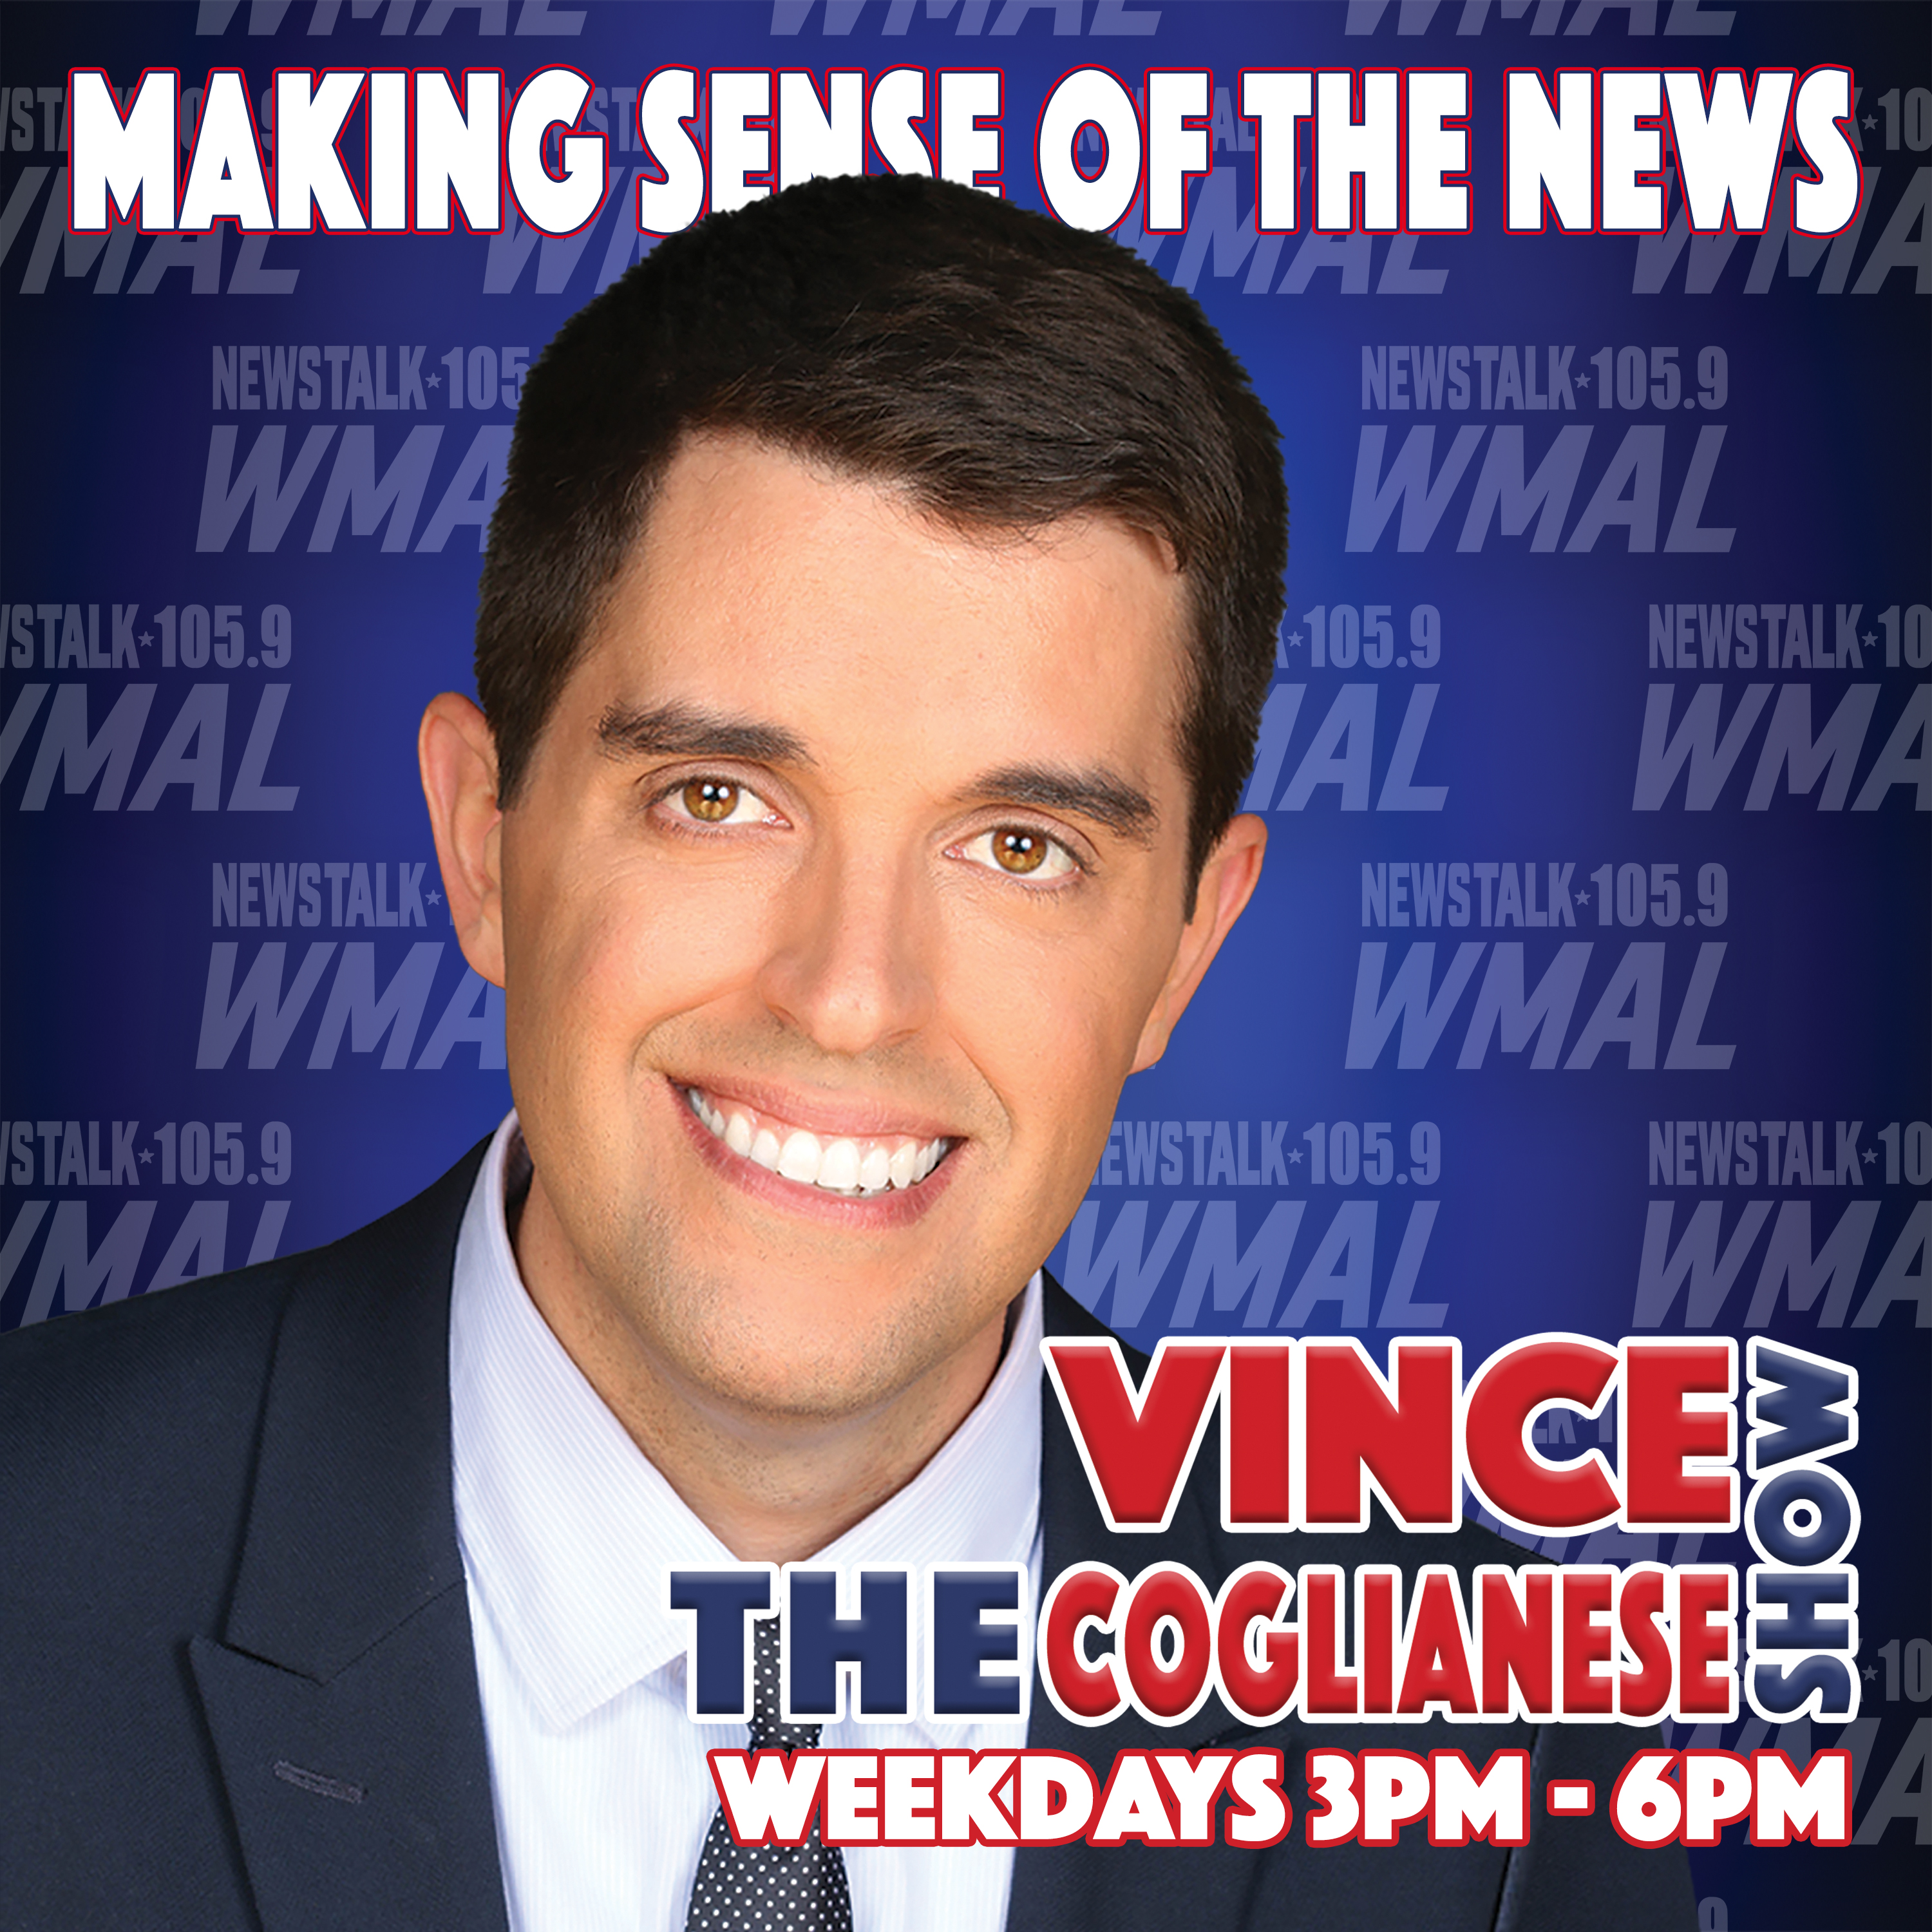 The Vince Coglianese Show - The Honorable Chuck DeVore  - 08.20.21